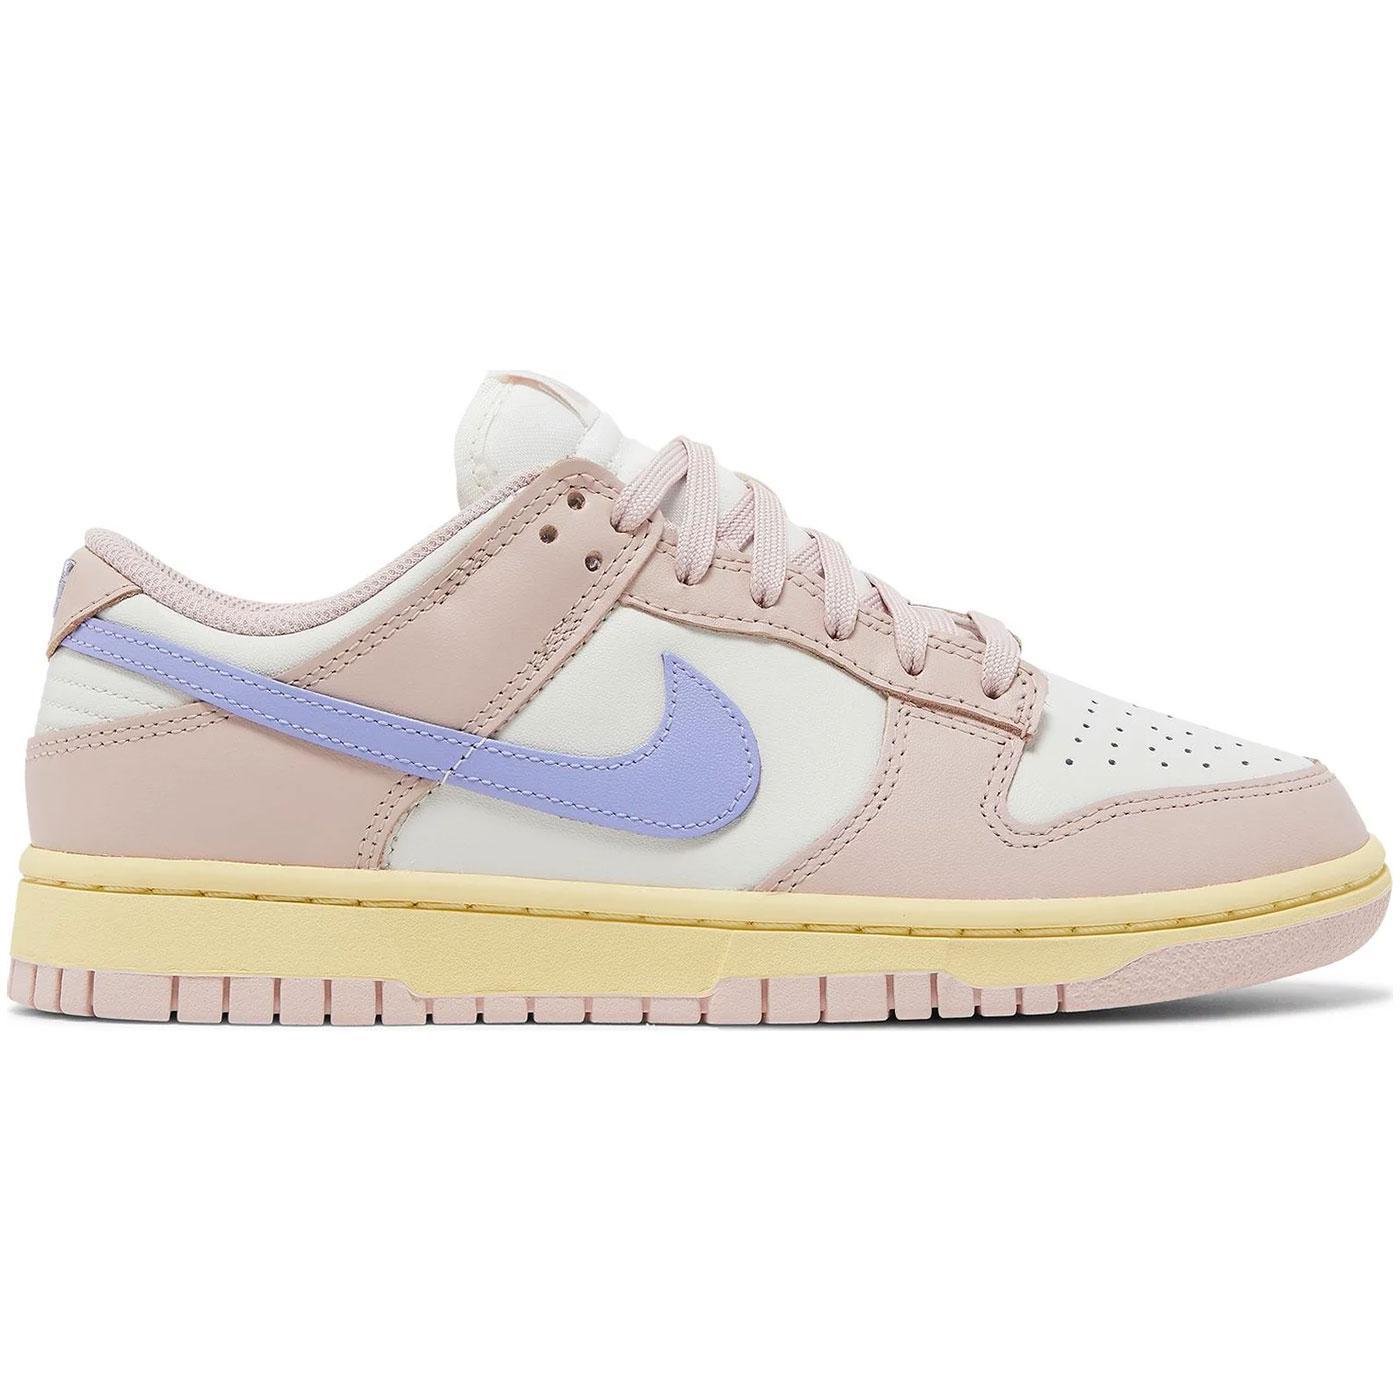 Wmns Dunk Low 'Pink Oxford' DD1503 601 | Nike